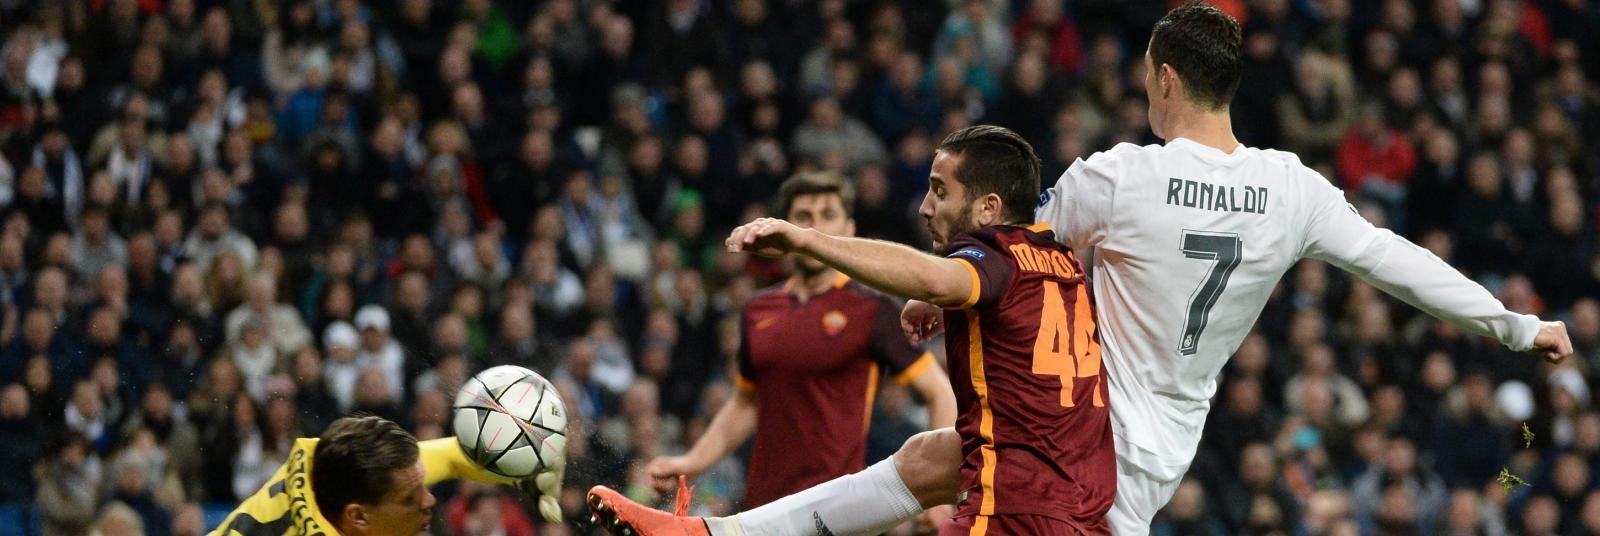 Manchester United’s £28m offer rejected by AS Roma for Greece international